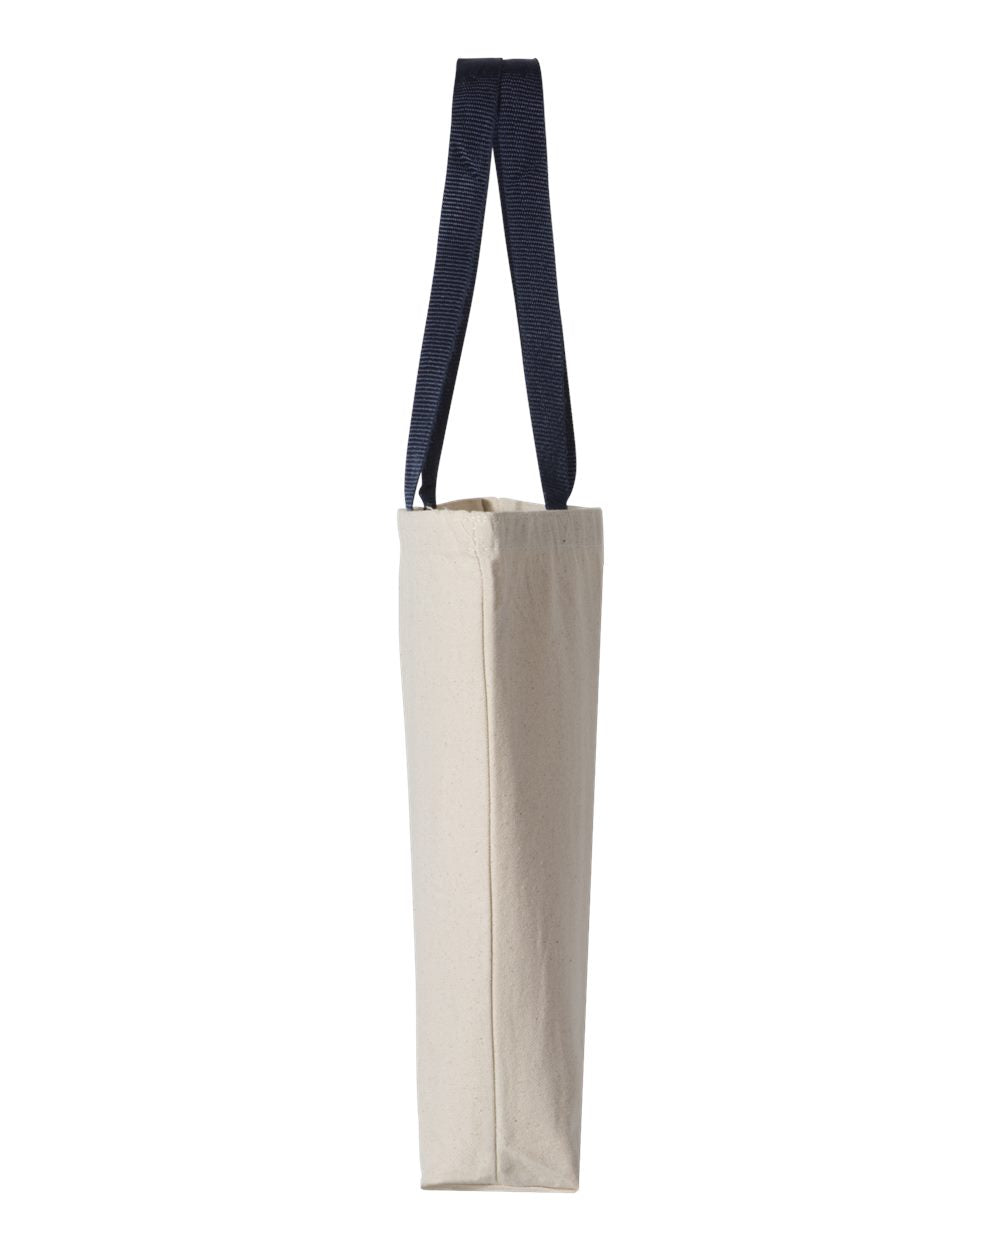 Q-Tees 11L Canvas Tote with Contrast-Color Handles Q4400 #color_Natural/ Navy